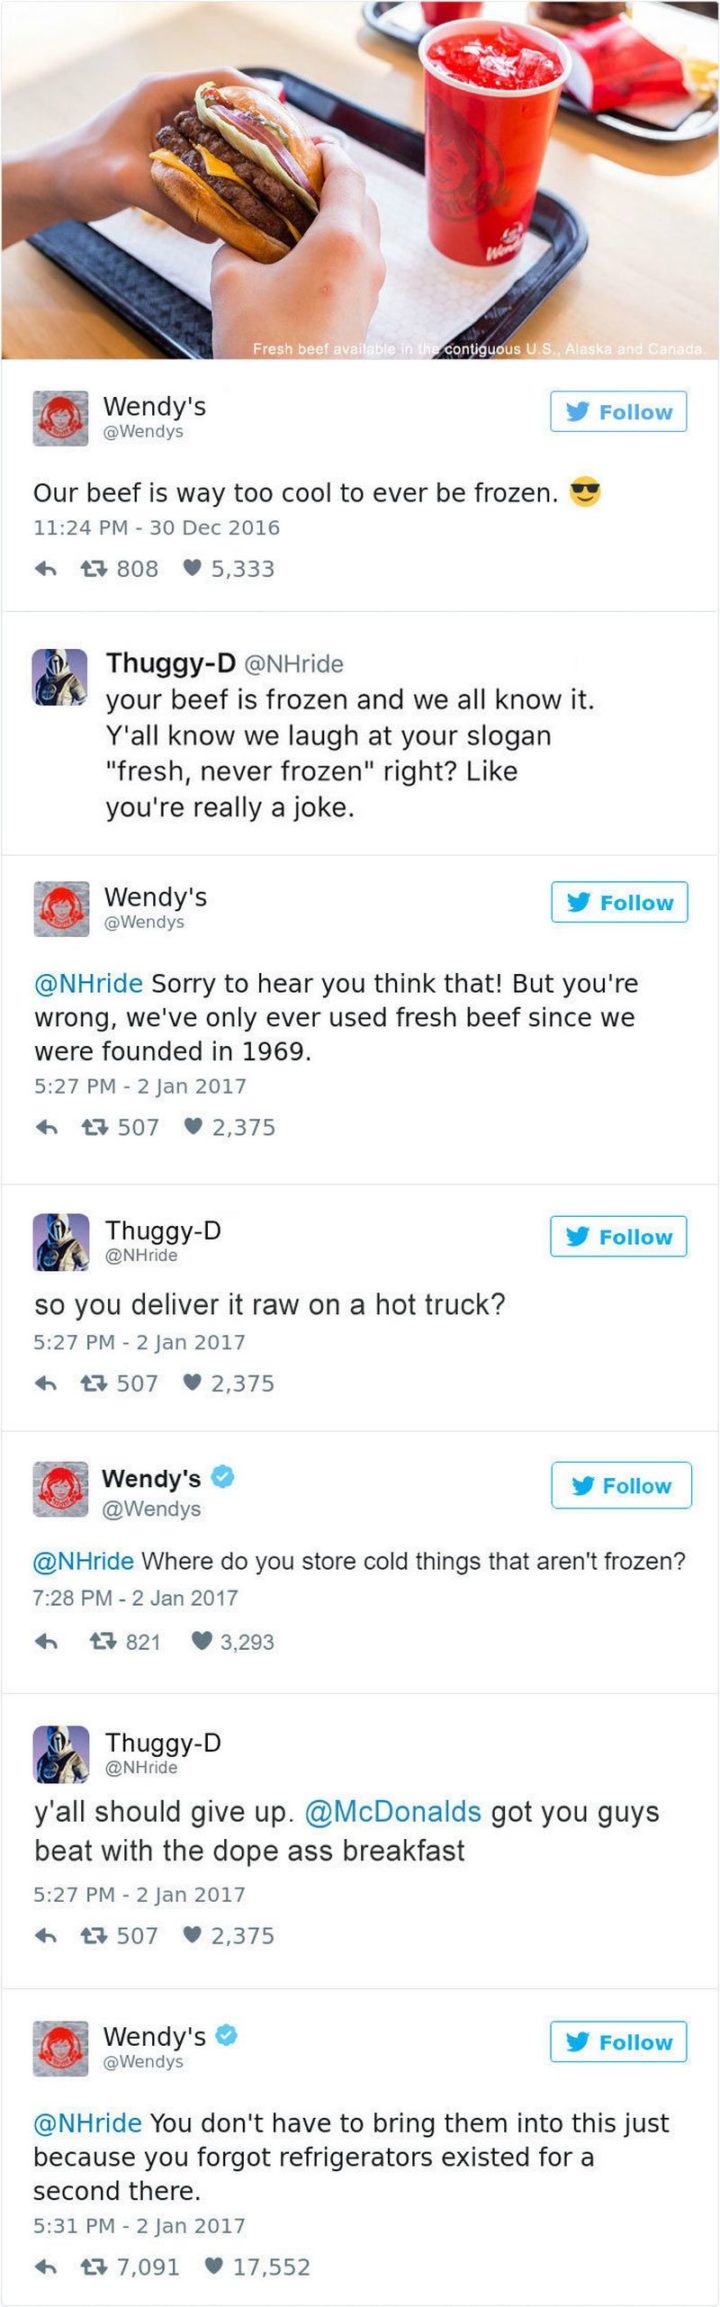 "Wendy's: Our beef is way too cool to ever be frozen. Thuggy-D: Your beef is frozen and we all know it. Y'all know we laugh at your slogan fresh, never frozen right? Like you're really a joke. Wendy's: Sorry to hear you think that! But you're wrong, we've only ever used fresh beef since we were founded in 1969. Thuggy-D: So you deliver it raw on a hot truck? Wendy's: Where do you store cold things that aren't frozen? Thuggy-D: Y'all should give up. McDonald's got you guys beat with the dope-ass breakfast. Wendy's: You don't have to bring them into this just because you forgot refrigerators existed for a second there."